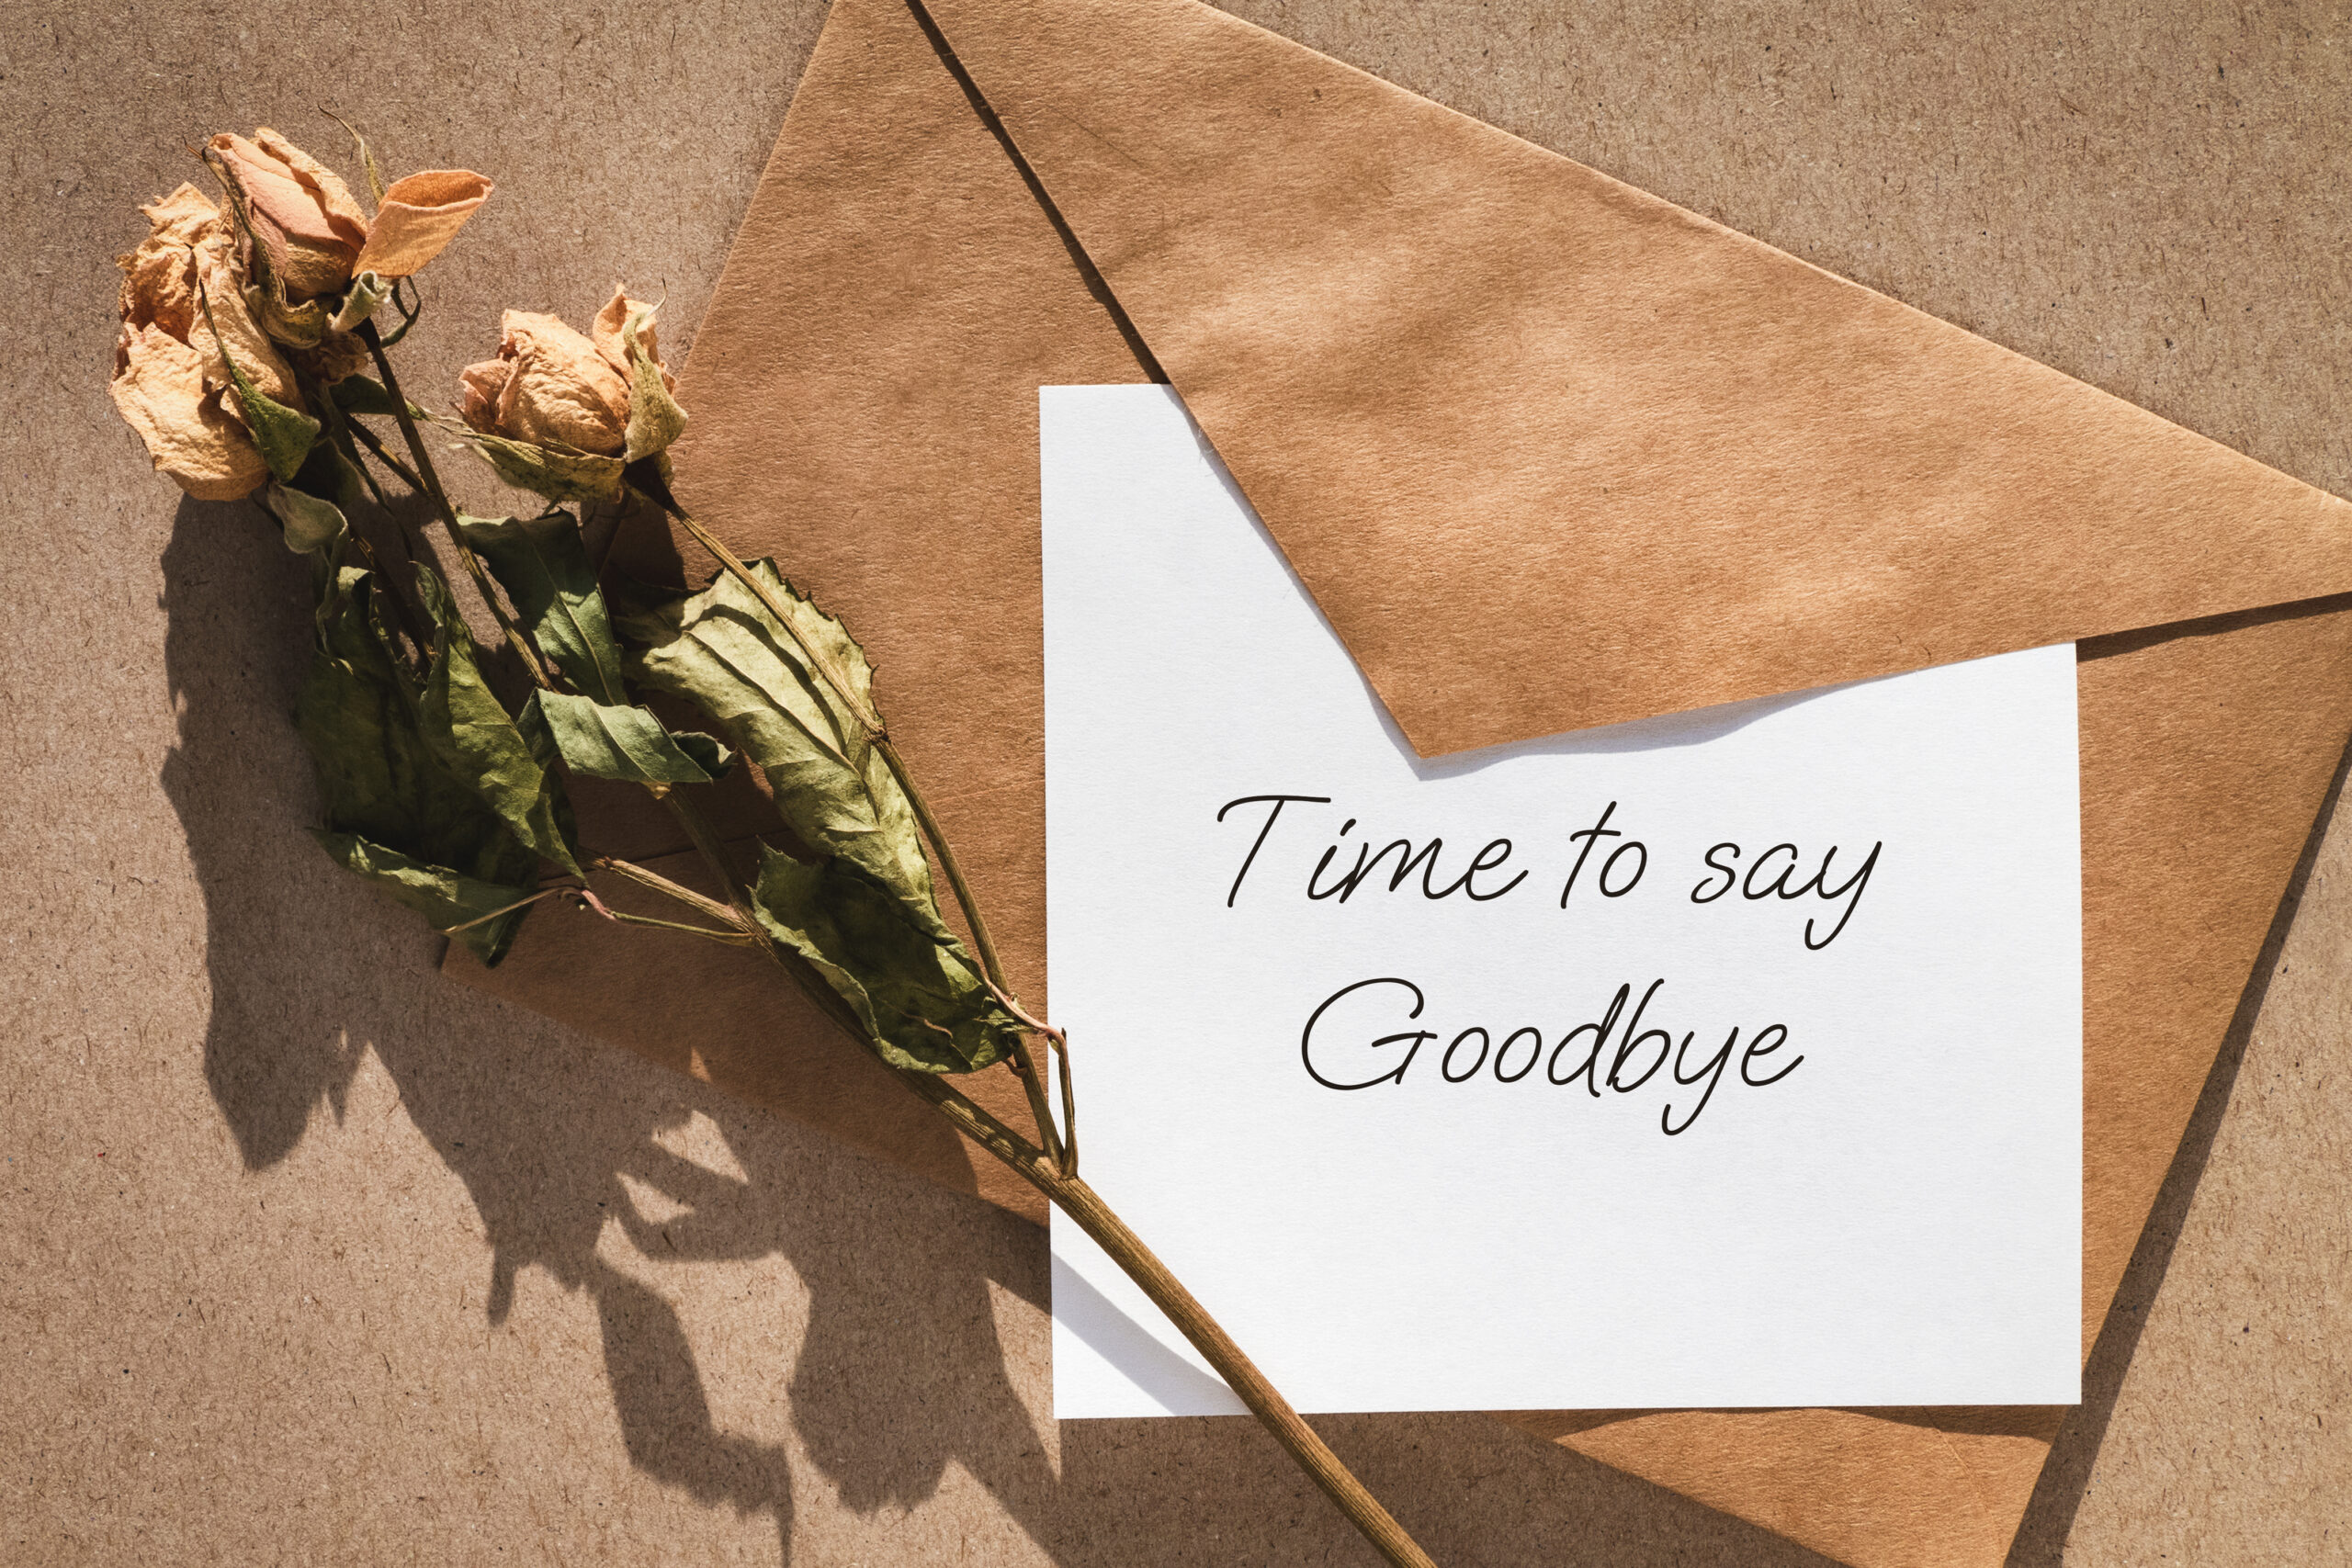 A paper that reads "Time to say goodbye" lays on top of a brown envelope. A bundle of dry roses are laid across the edge of the envelope. Sometimes falling out of love means it's time to say goodbye.